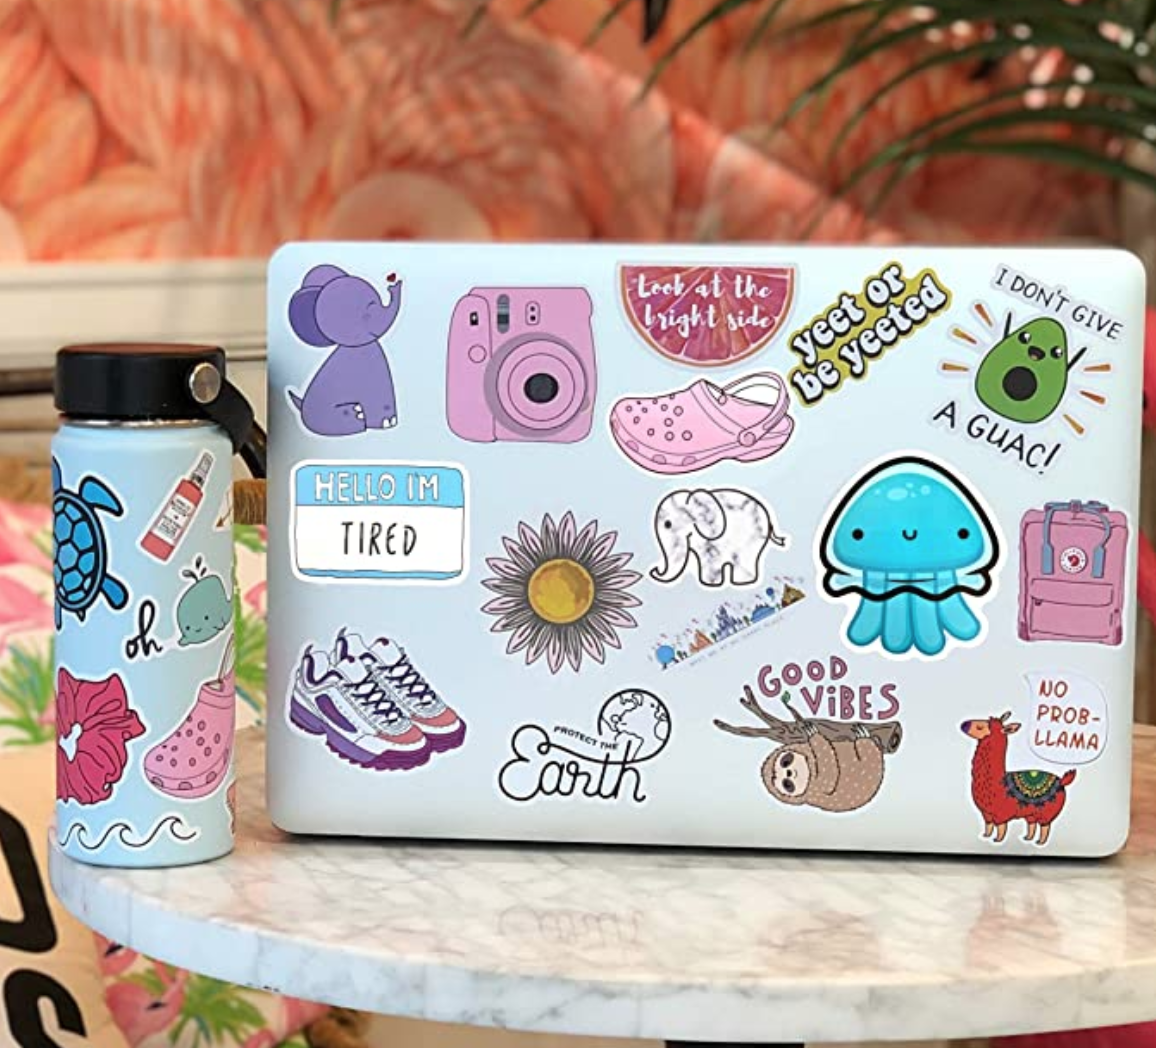 70 VSCO Stickers, Aesthetic Stickers, Cute Stickers, Laptop Stickers, Vinyl Stickers, Stickers for Water Bottles, Waterproof Stickers, Stickers for Kids Teens Girls, Computer Stickers, Sticker Pack